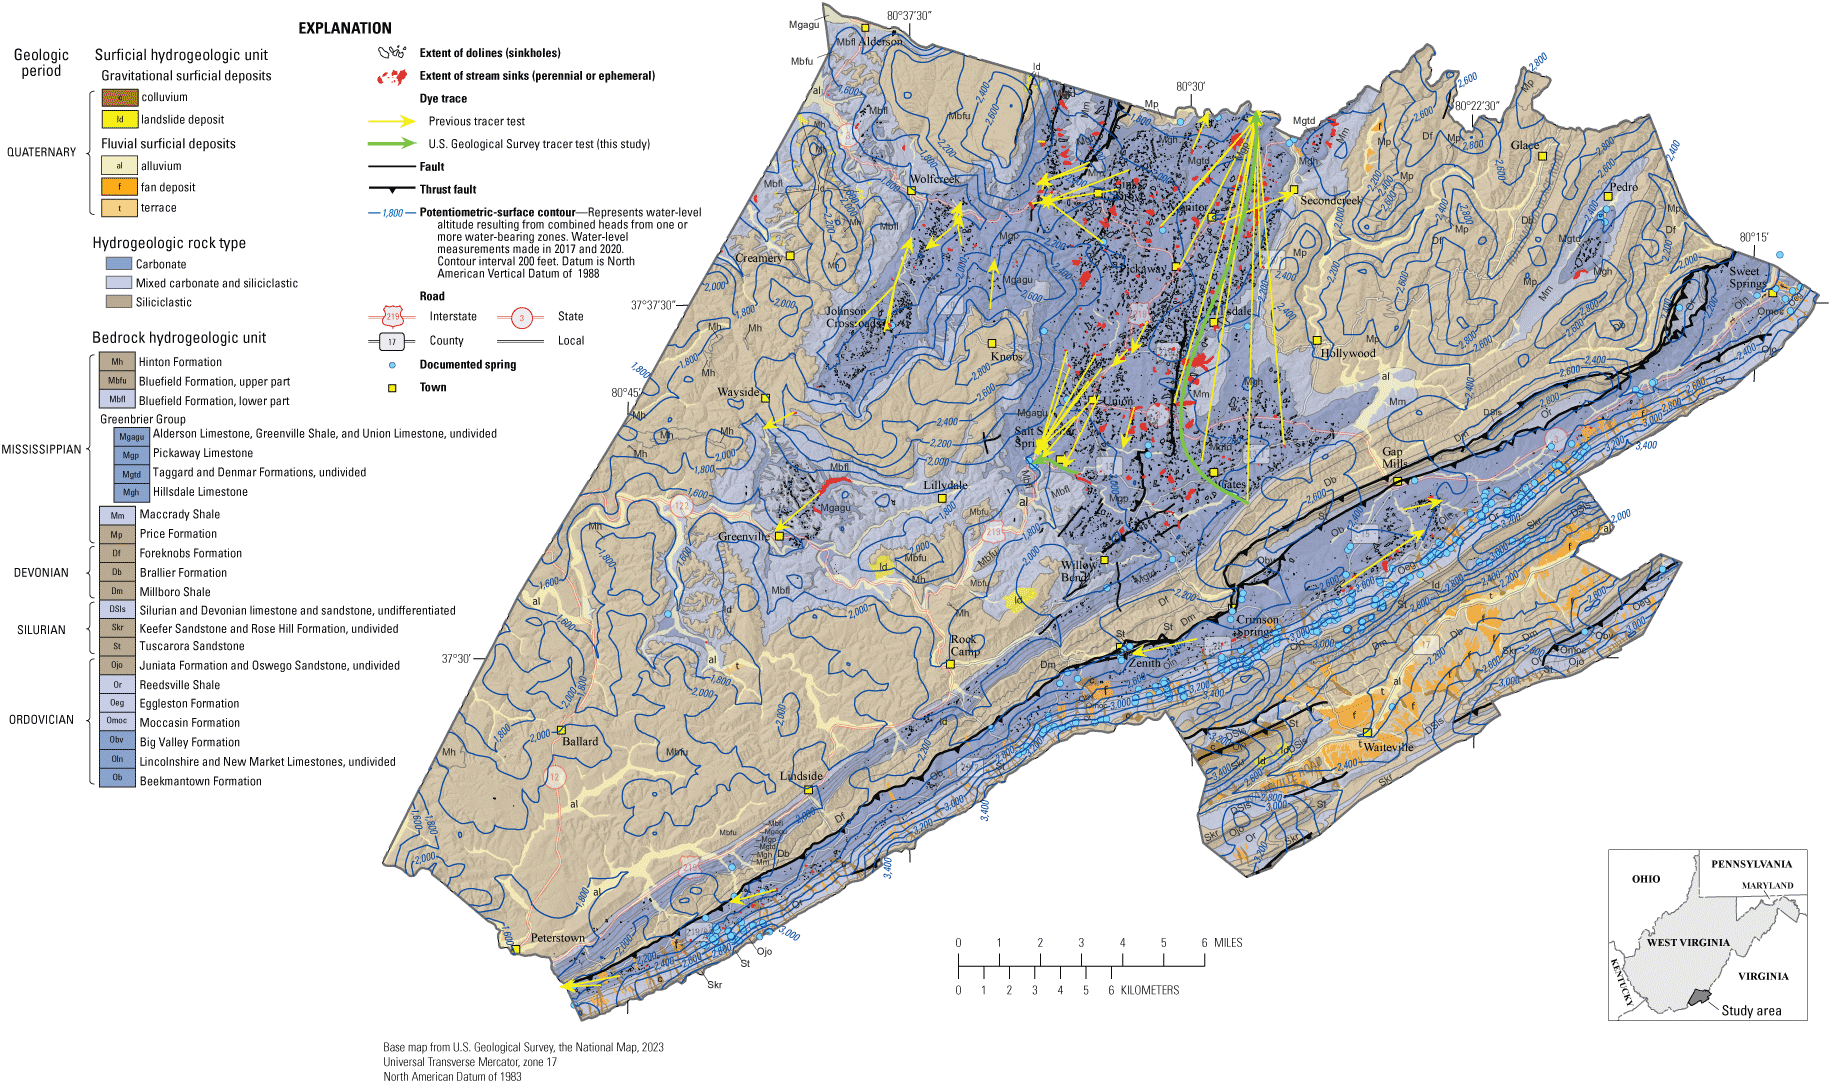 Most of the surficial hydrogeologic deposits are southeast of the thrust faults.